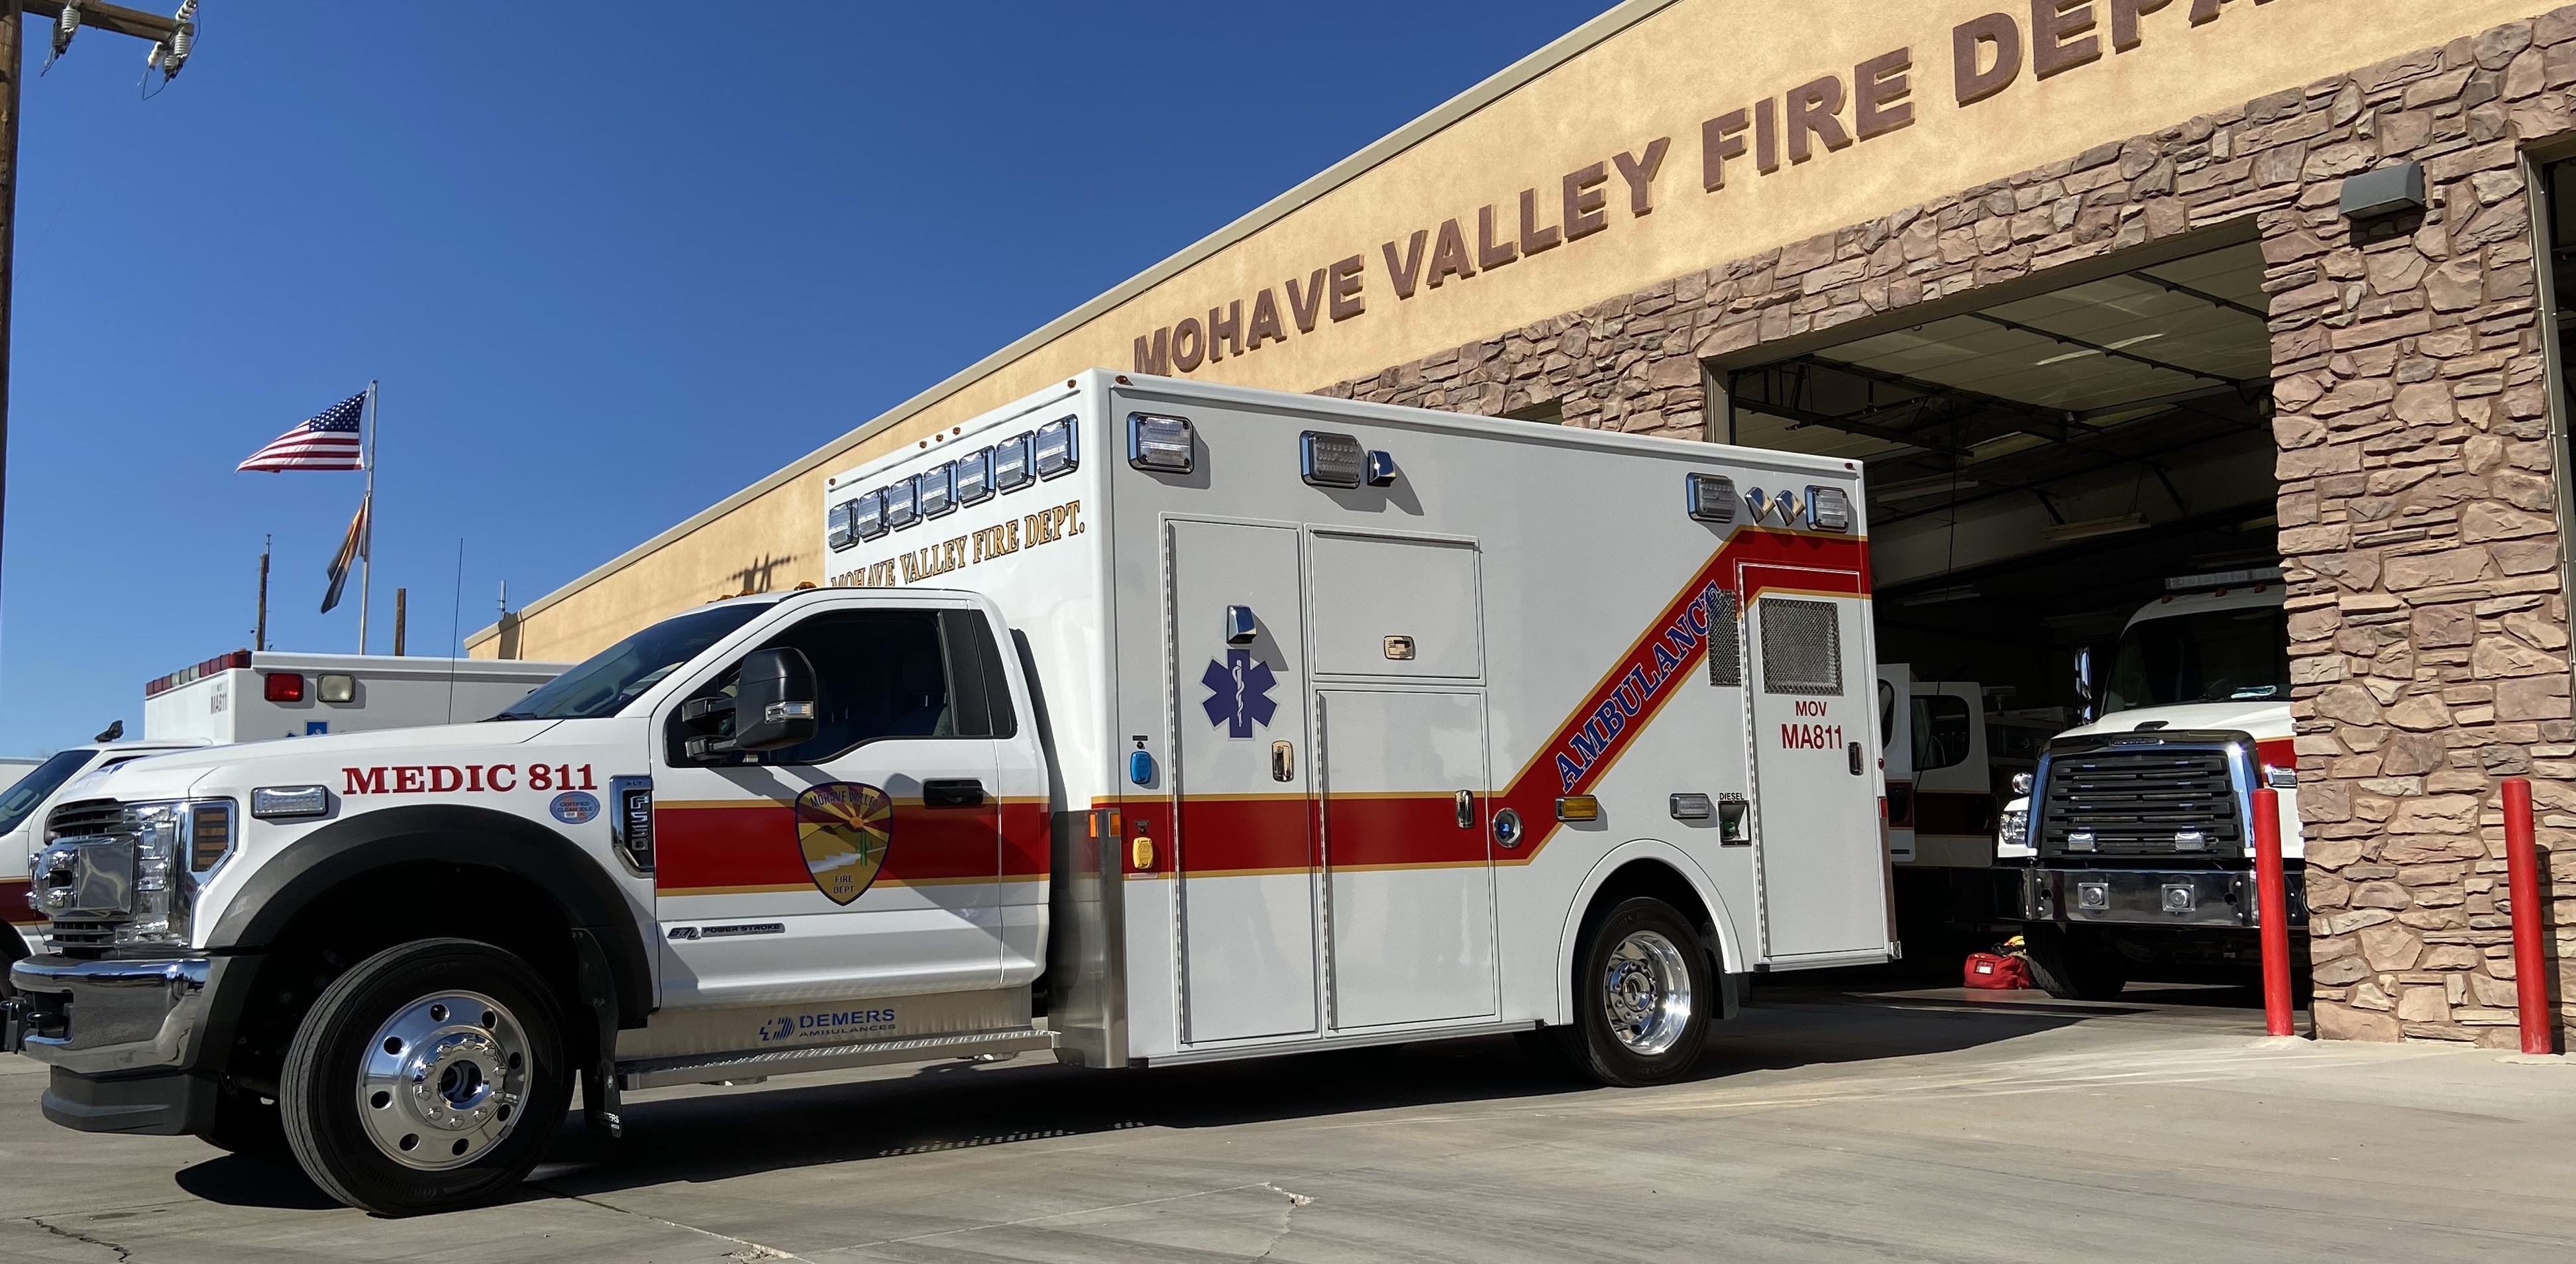 Mohave Valley FD - Demers MXP170